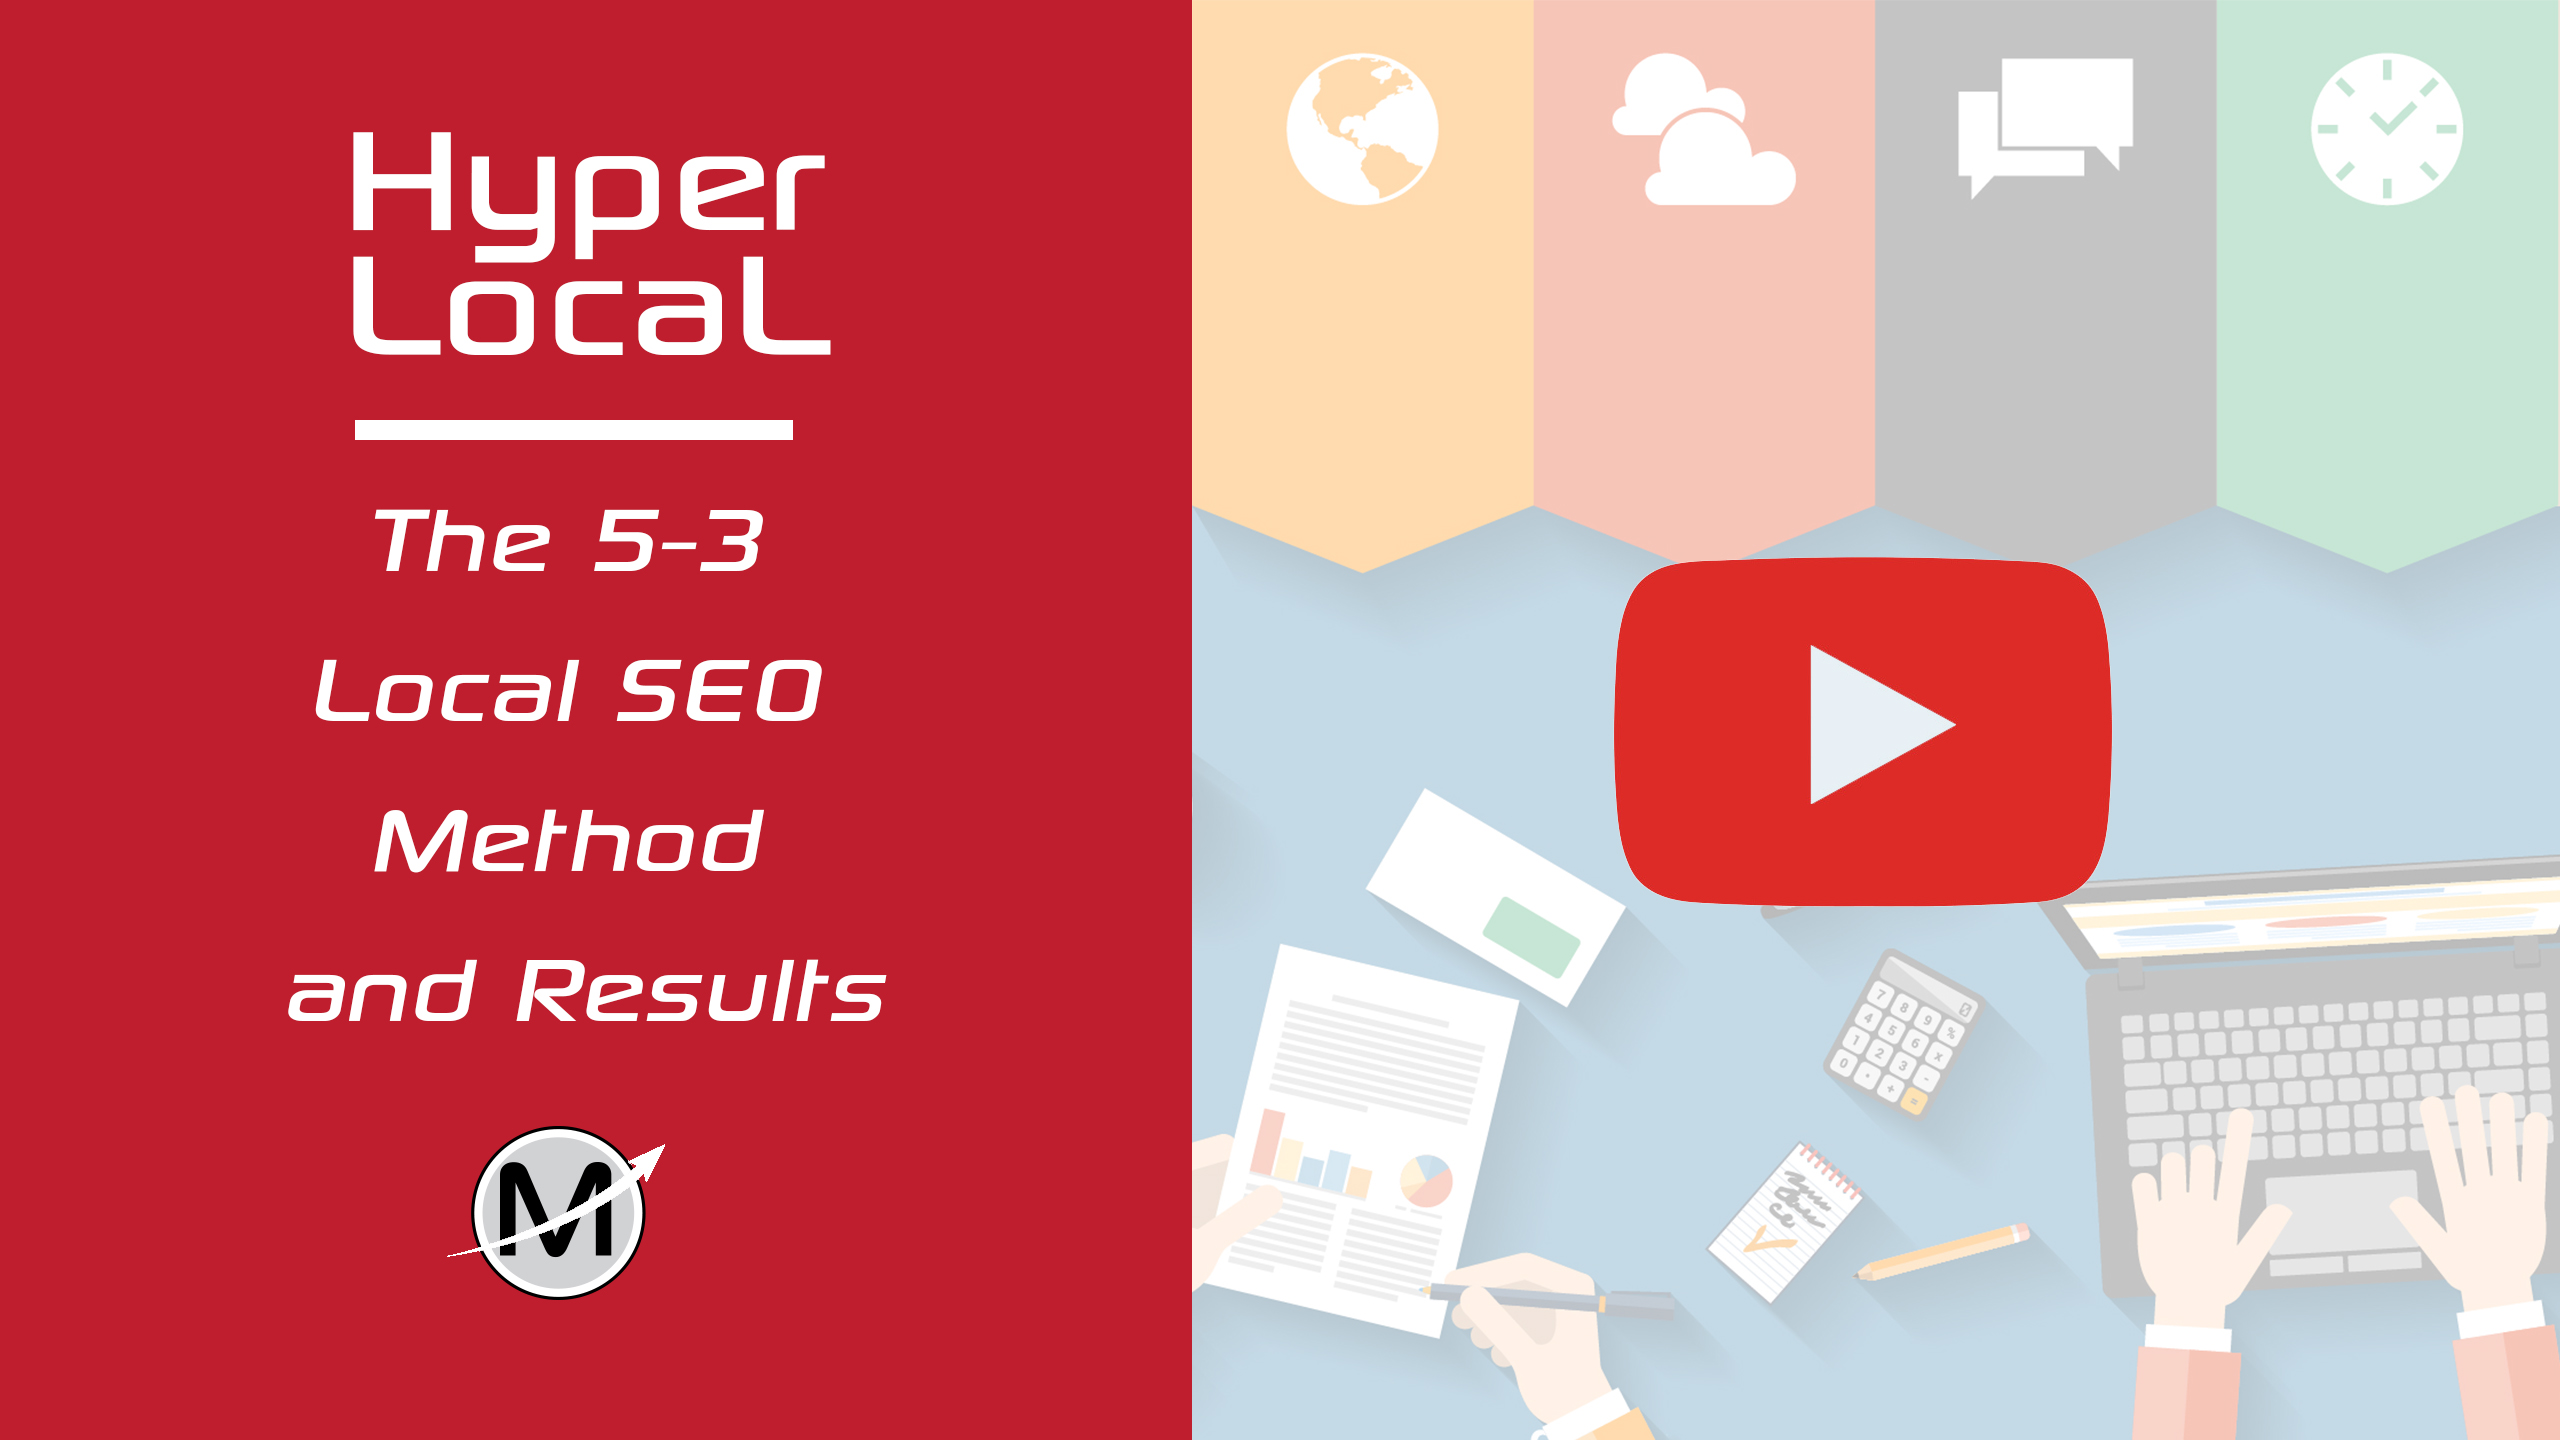 Local SEO - the 5-3 Method and Results